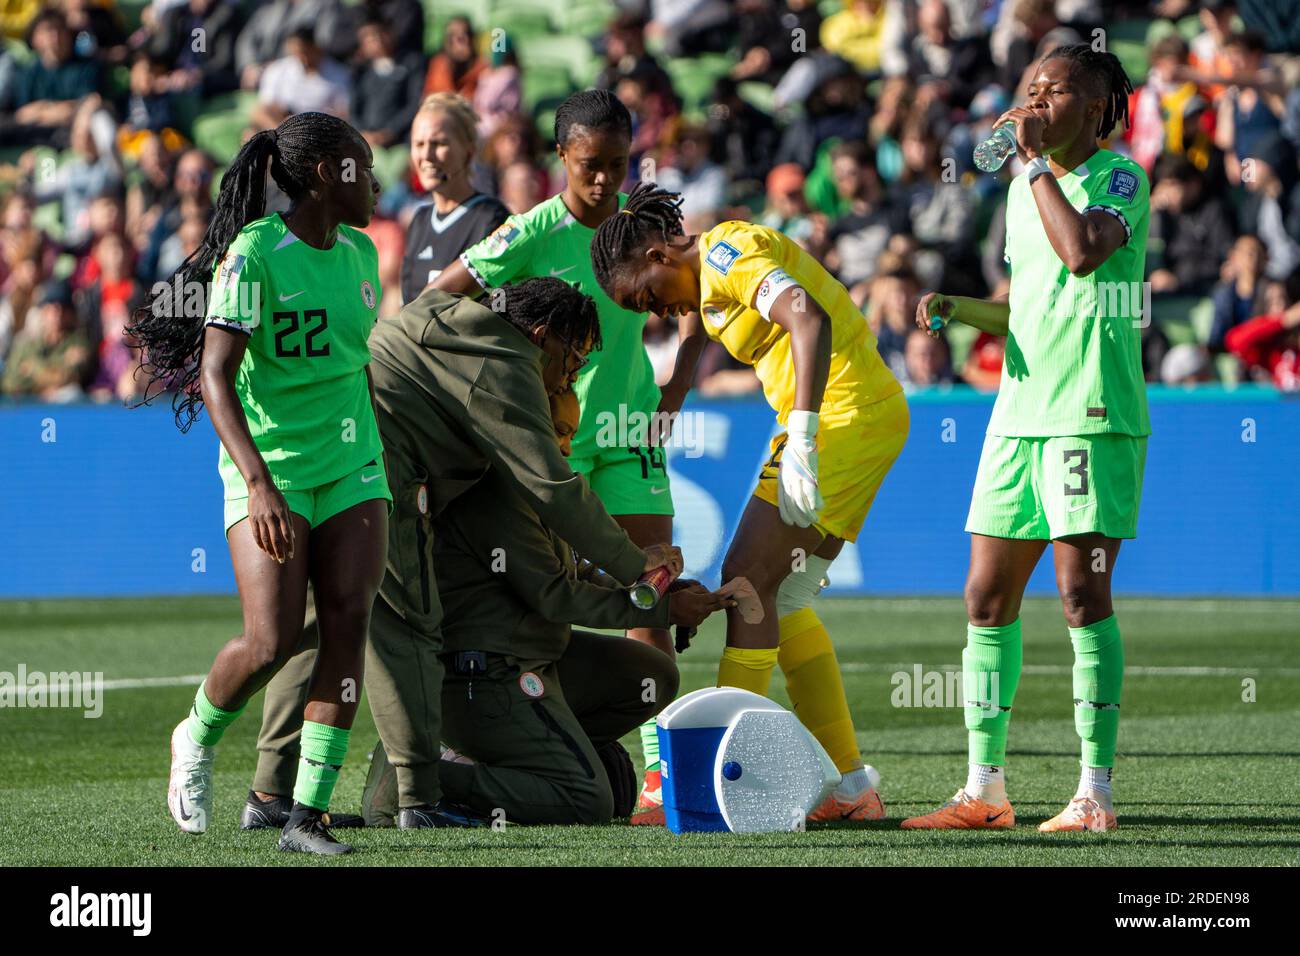 Melbourne, Australia. 21st July, 2023. Melbourne, Australia, July 21st 2023: The medical team checks on goalkeeper Chiamaka Nnadozie (16 Nigeria) during the 2023 FIFA Womens World Cup football match between Nigeria and Canada at Melbourne Rectangular Stadium in Melbourne, Australia. (Noe Llamas/SPP) Credit: SPP Sport Press Photo. /Alamy Live News Stock Photo